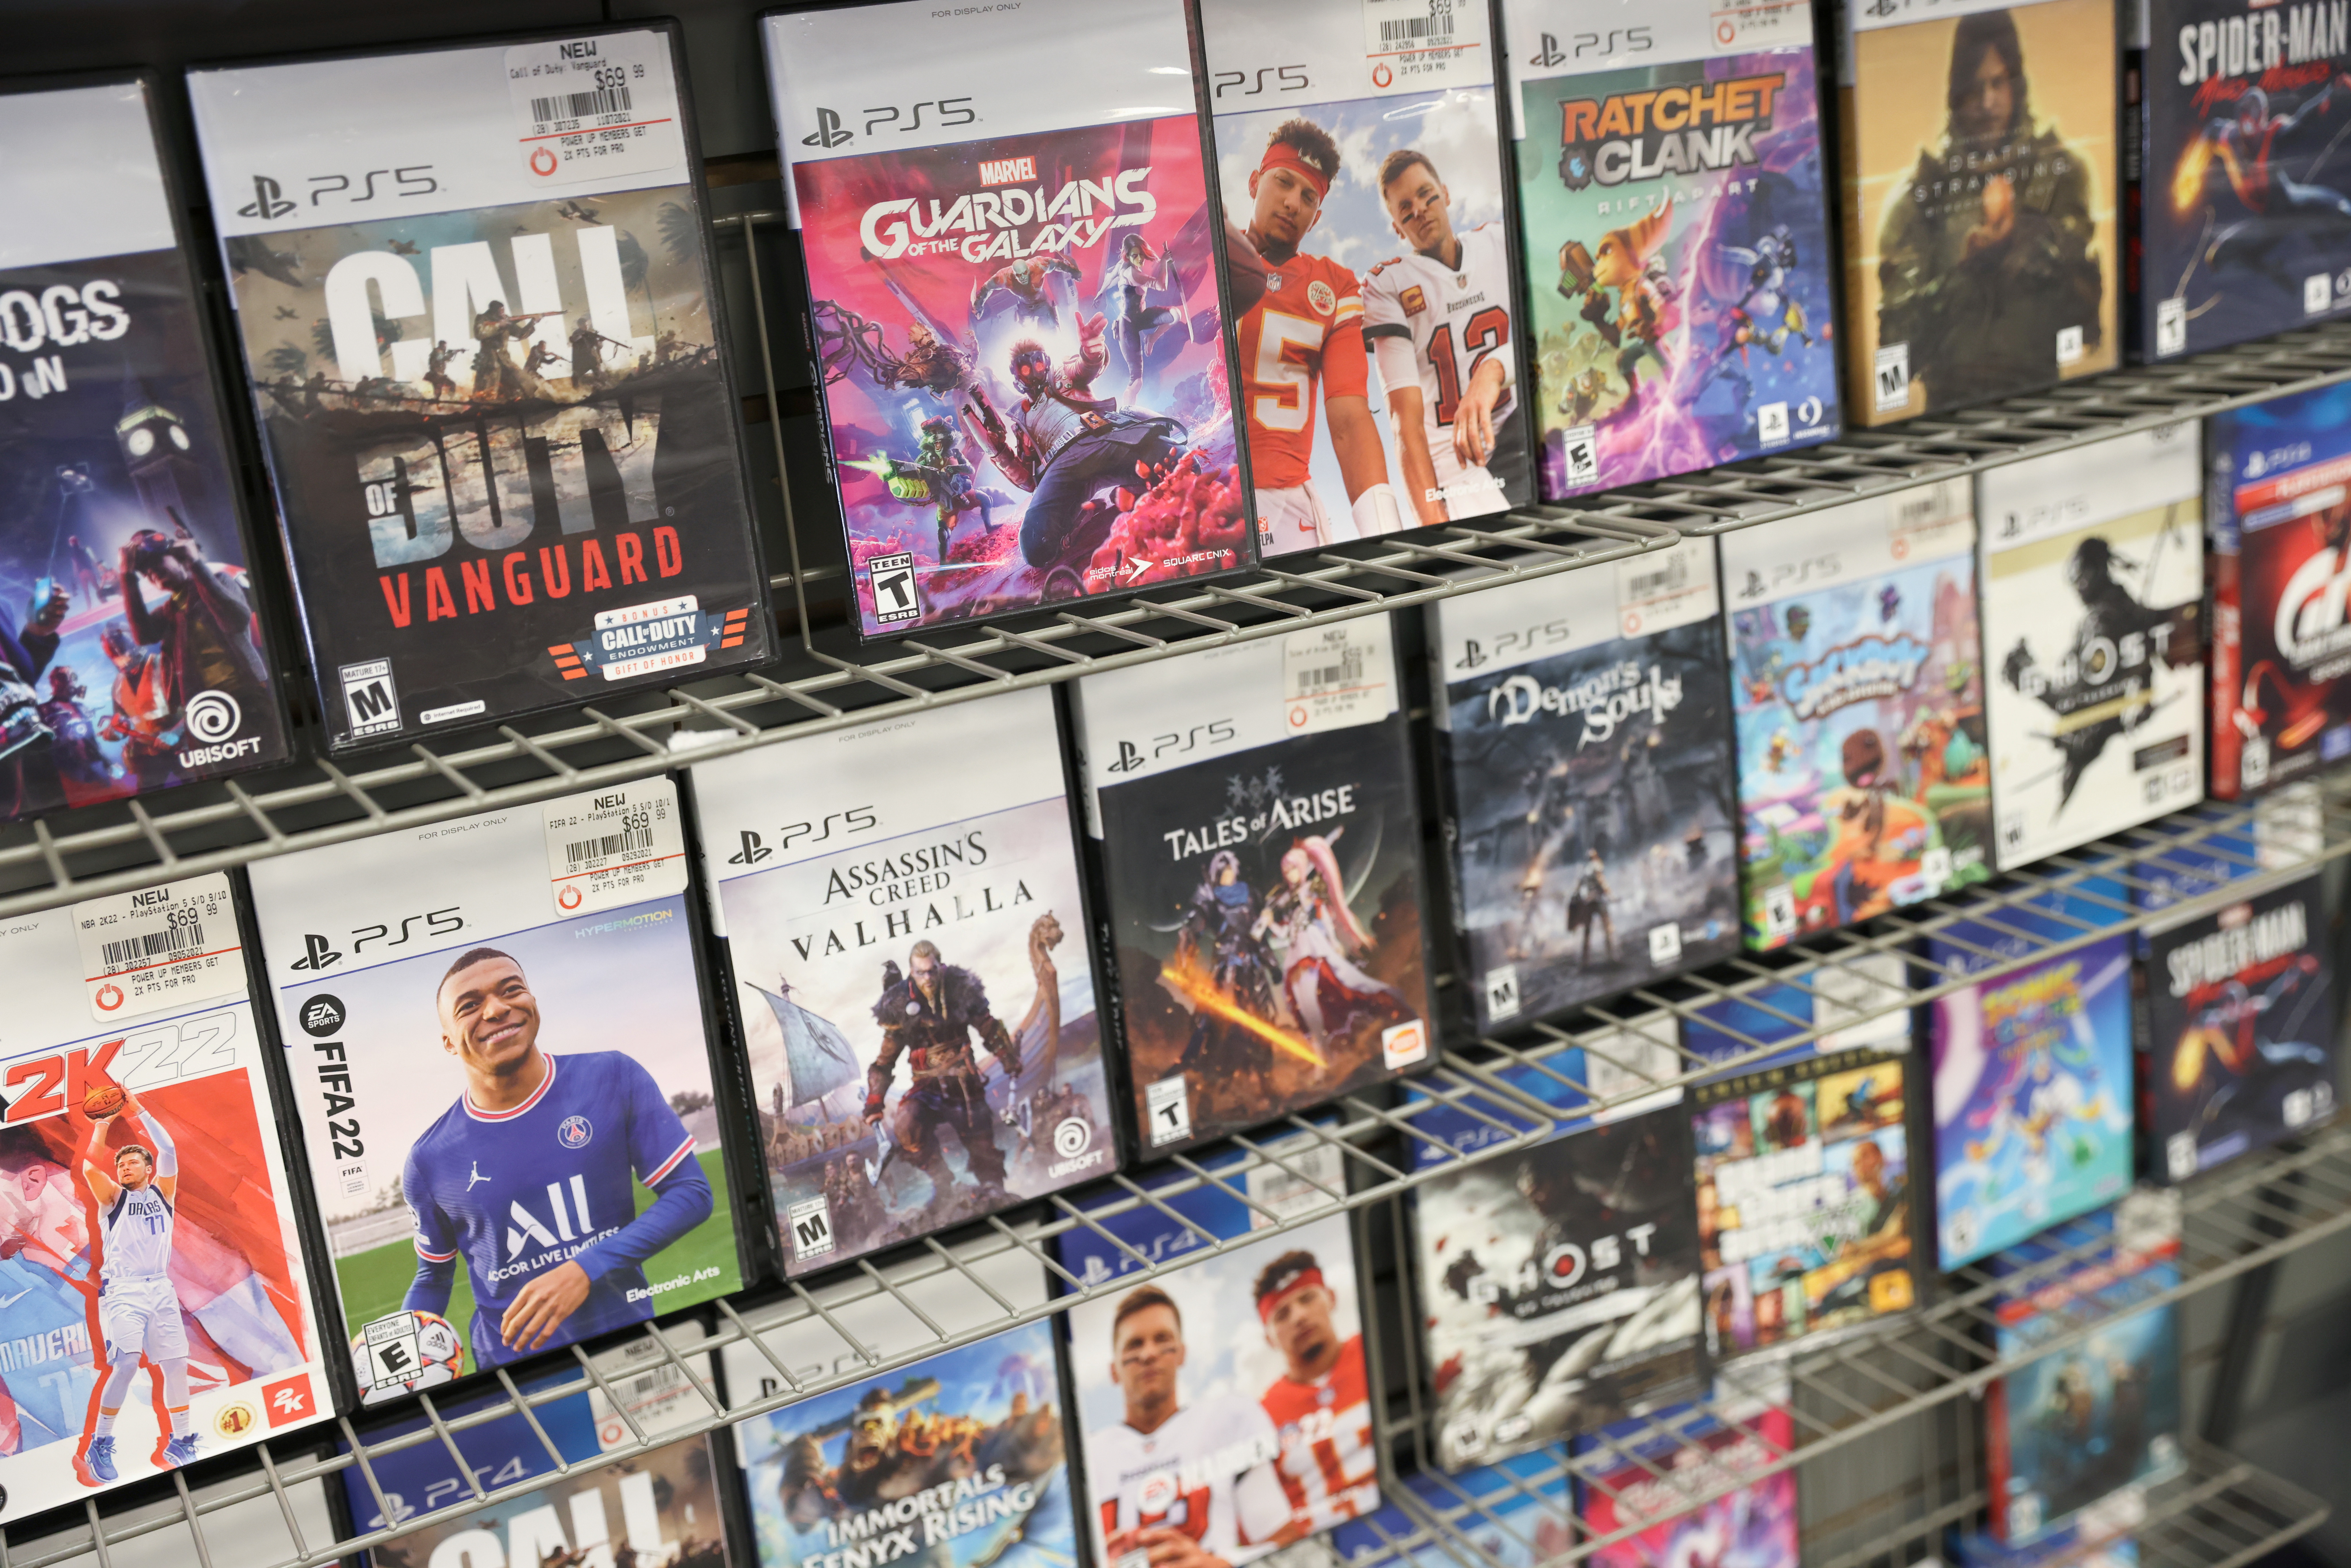 PS5 games by PlayStation are seen for sale at a GameStop in Manhattan, New York